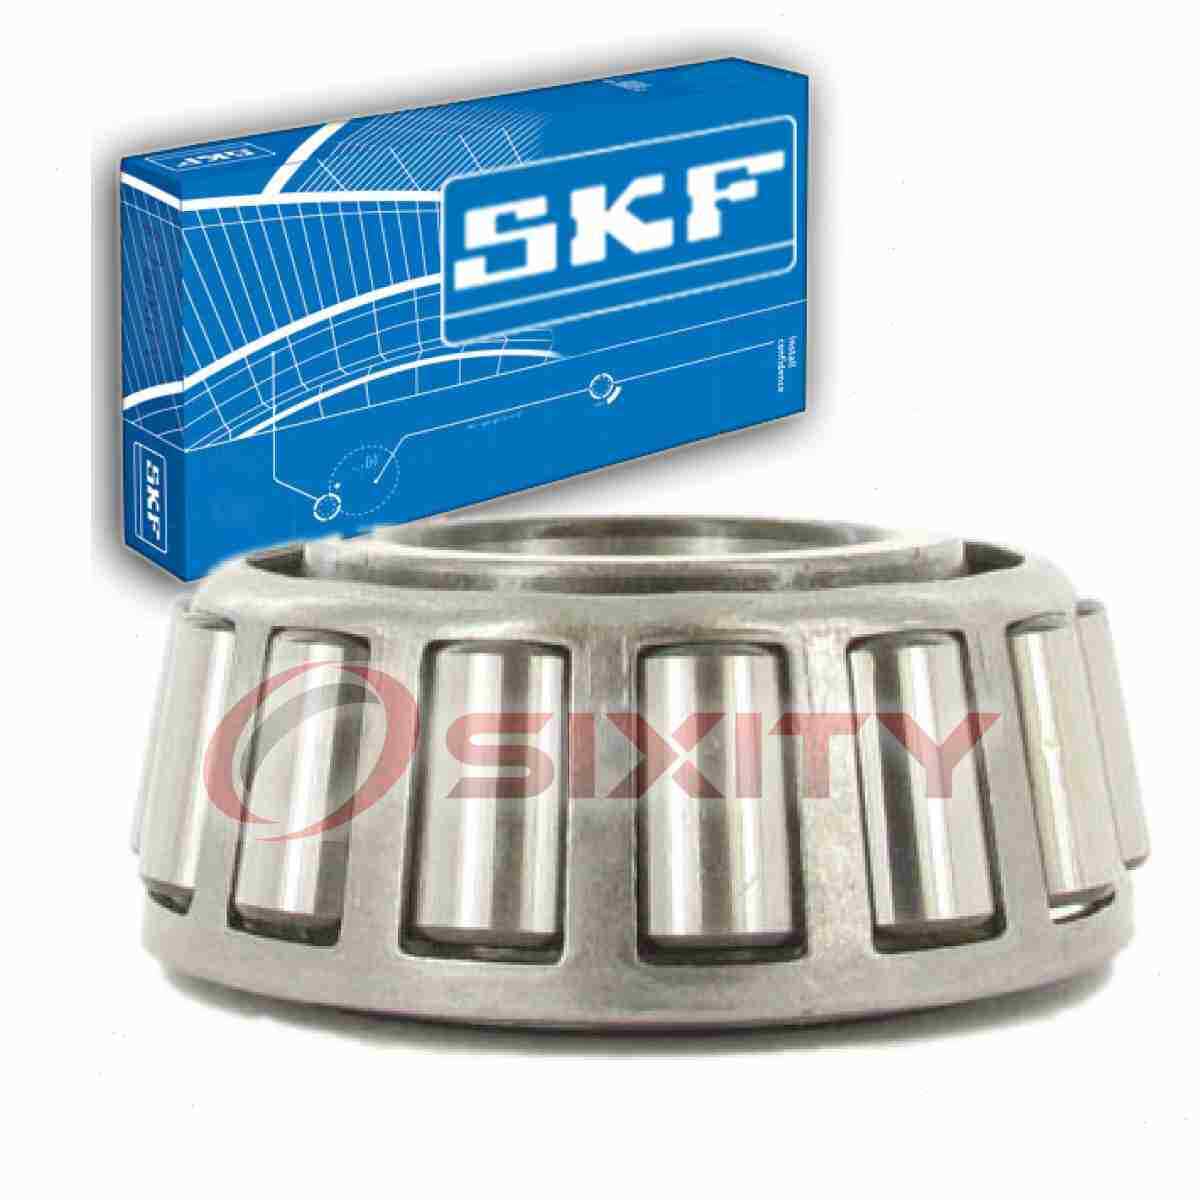 SKF Front Outer Wheel Bearing for 1961-1978 Oldsmobile Cutlass Axle dz